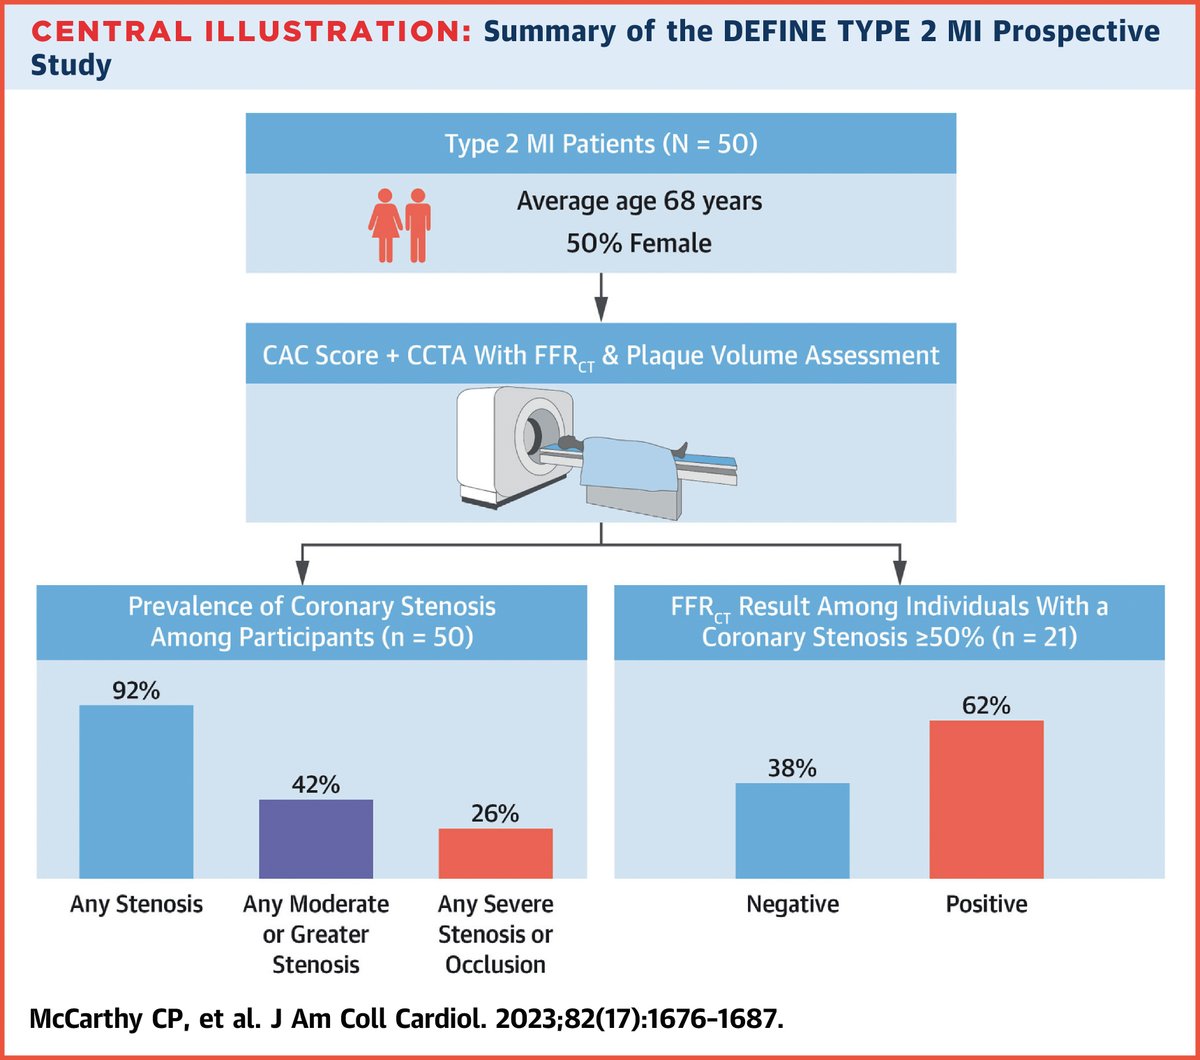 New study in #JACC observes that coronary artery plaque is common among individuals with type 2 MI but most have non-obstructive coronary artery disease. bit.ly/3txhqeL (1/2) #cvCAD #cvMI #CardioTwitter @CianPMcCarthy @JJheart_doc @RezaMohebiMD